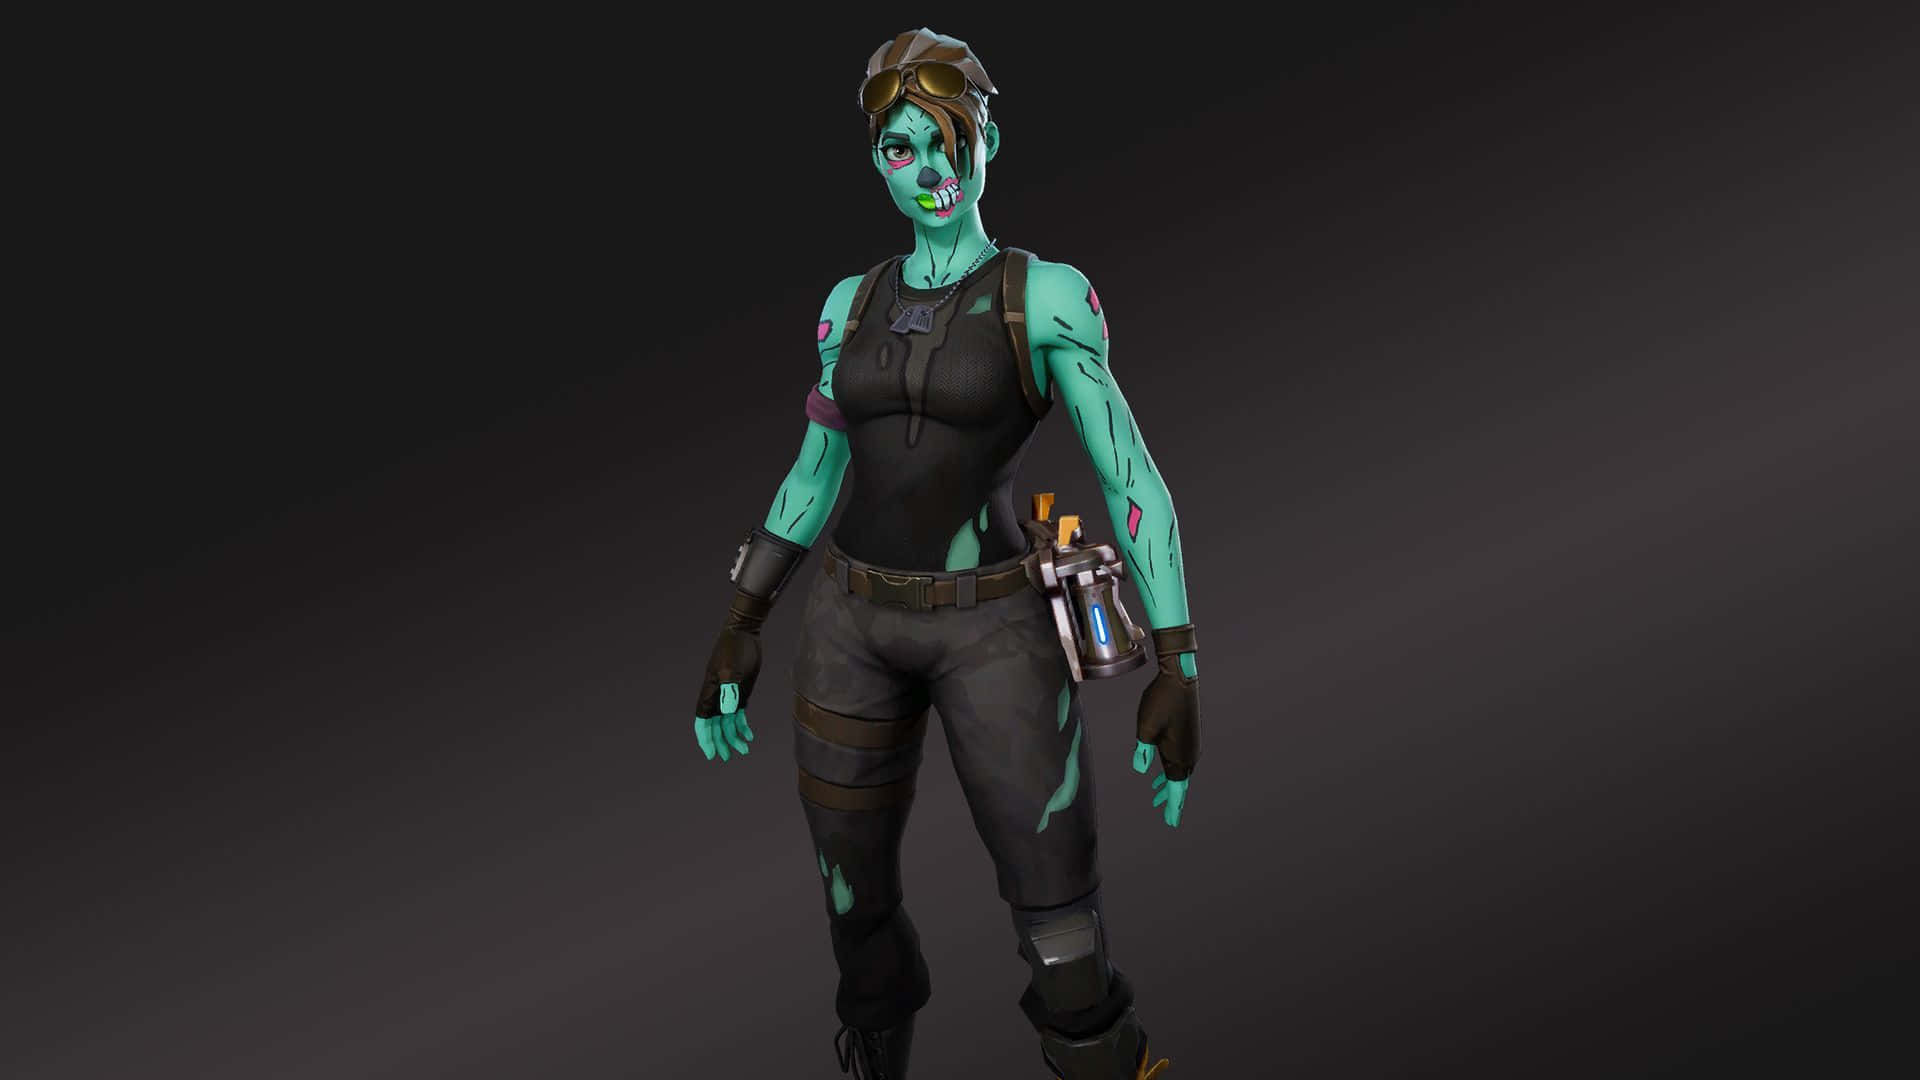 Show your love for the popular video game ‘Fortnite’ with a cool Ghoul Trooper wallpaper on your phone Wallpaper